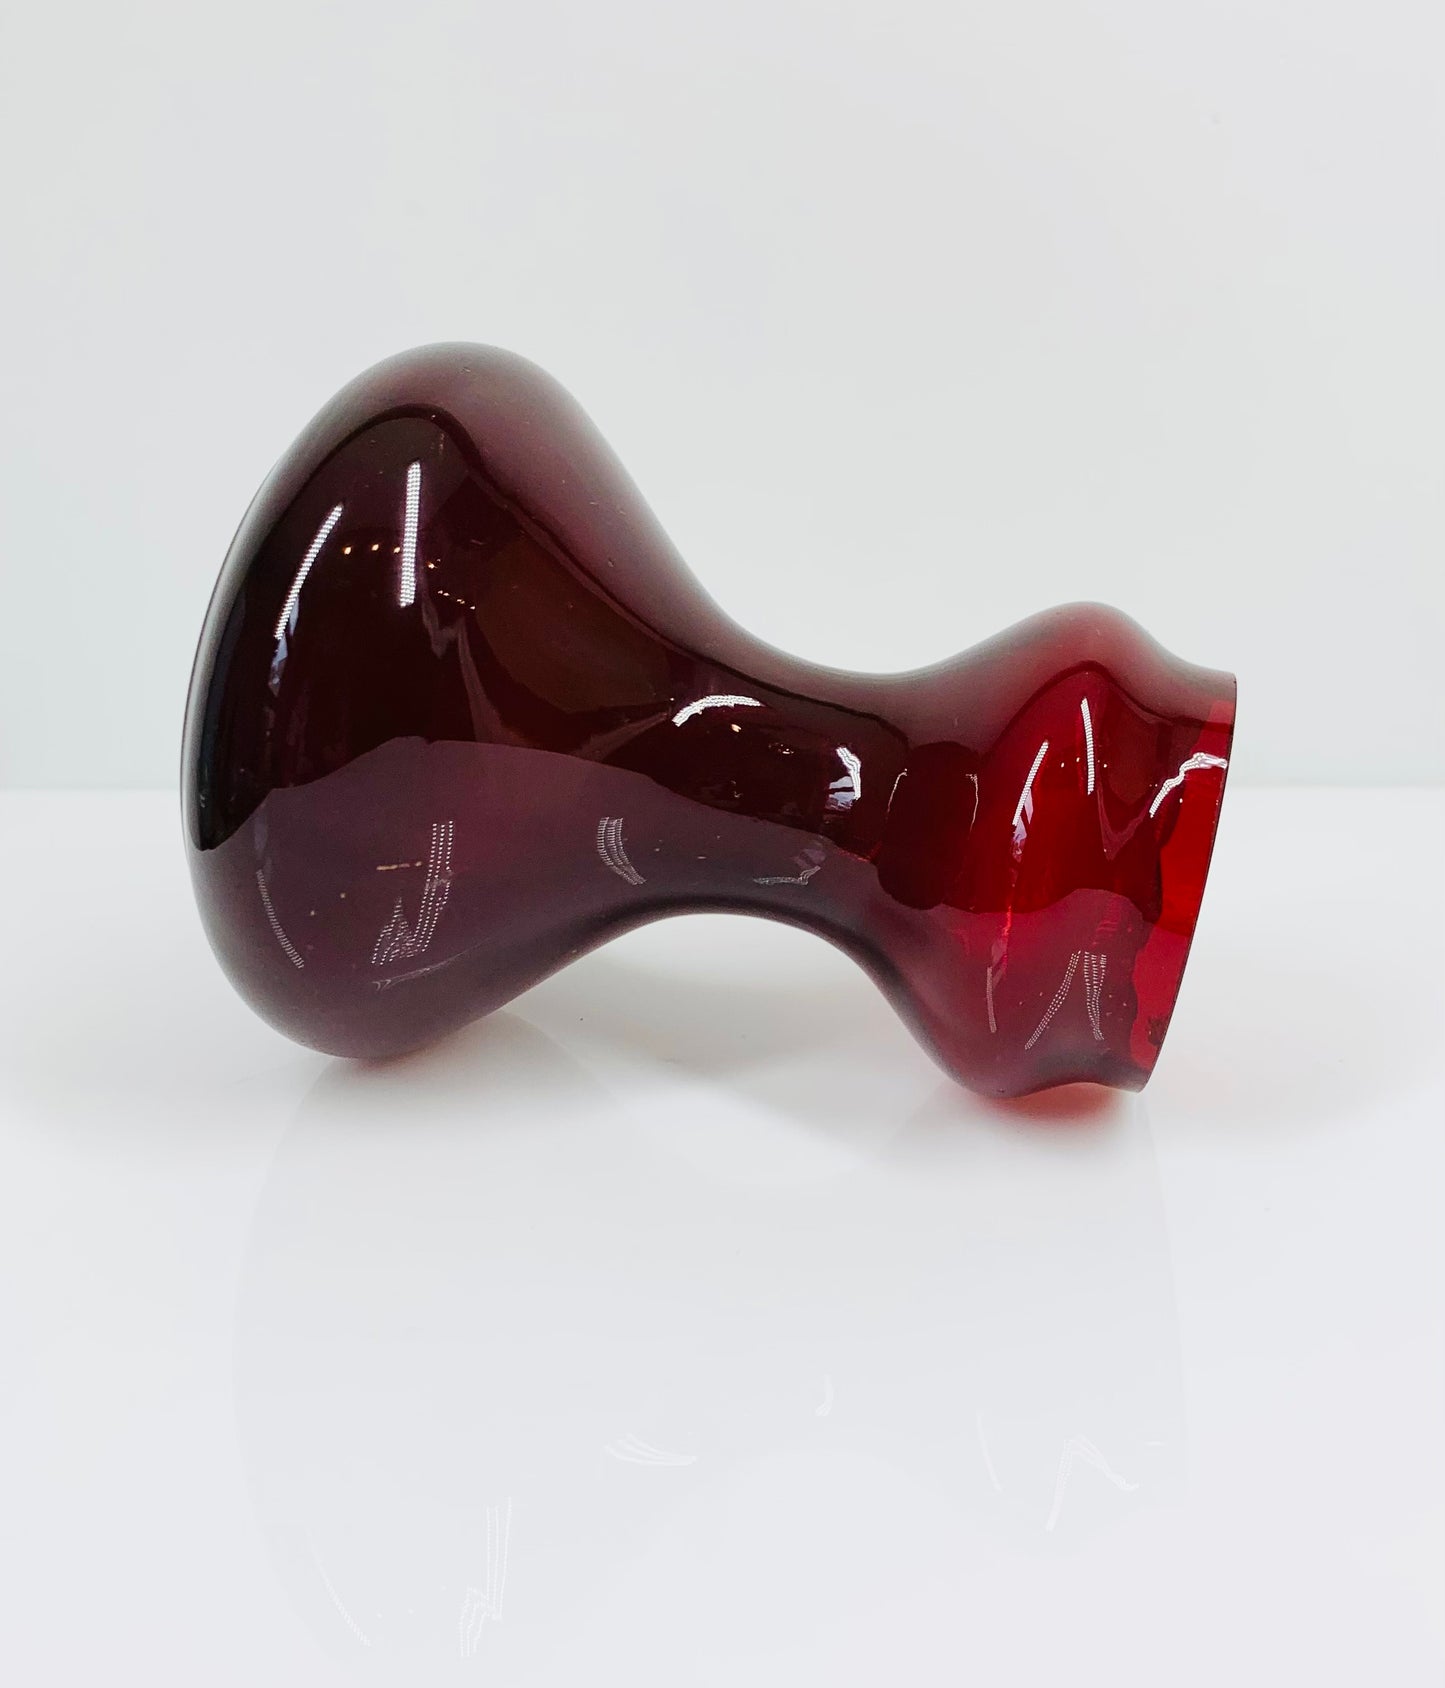 Space Age hand made red glass posy vase